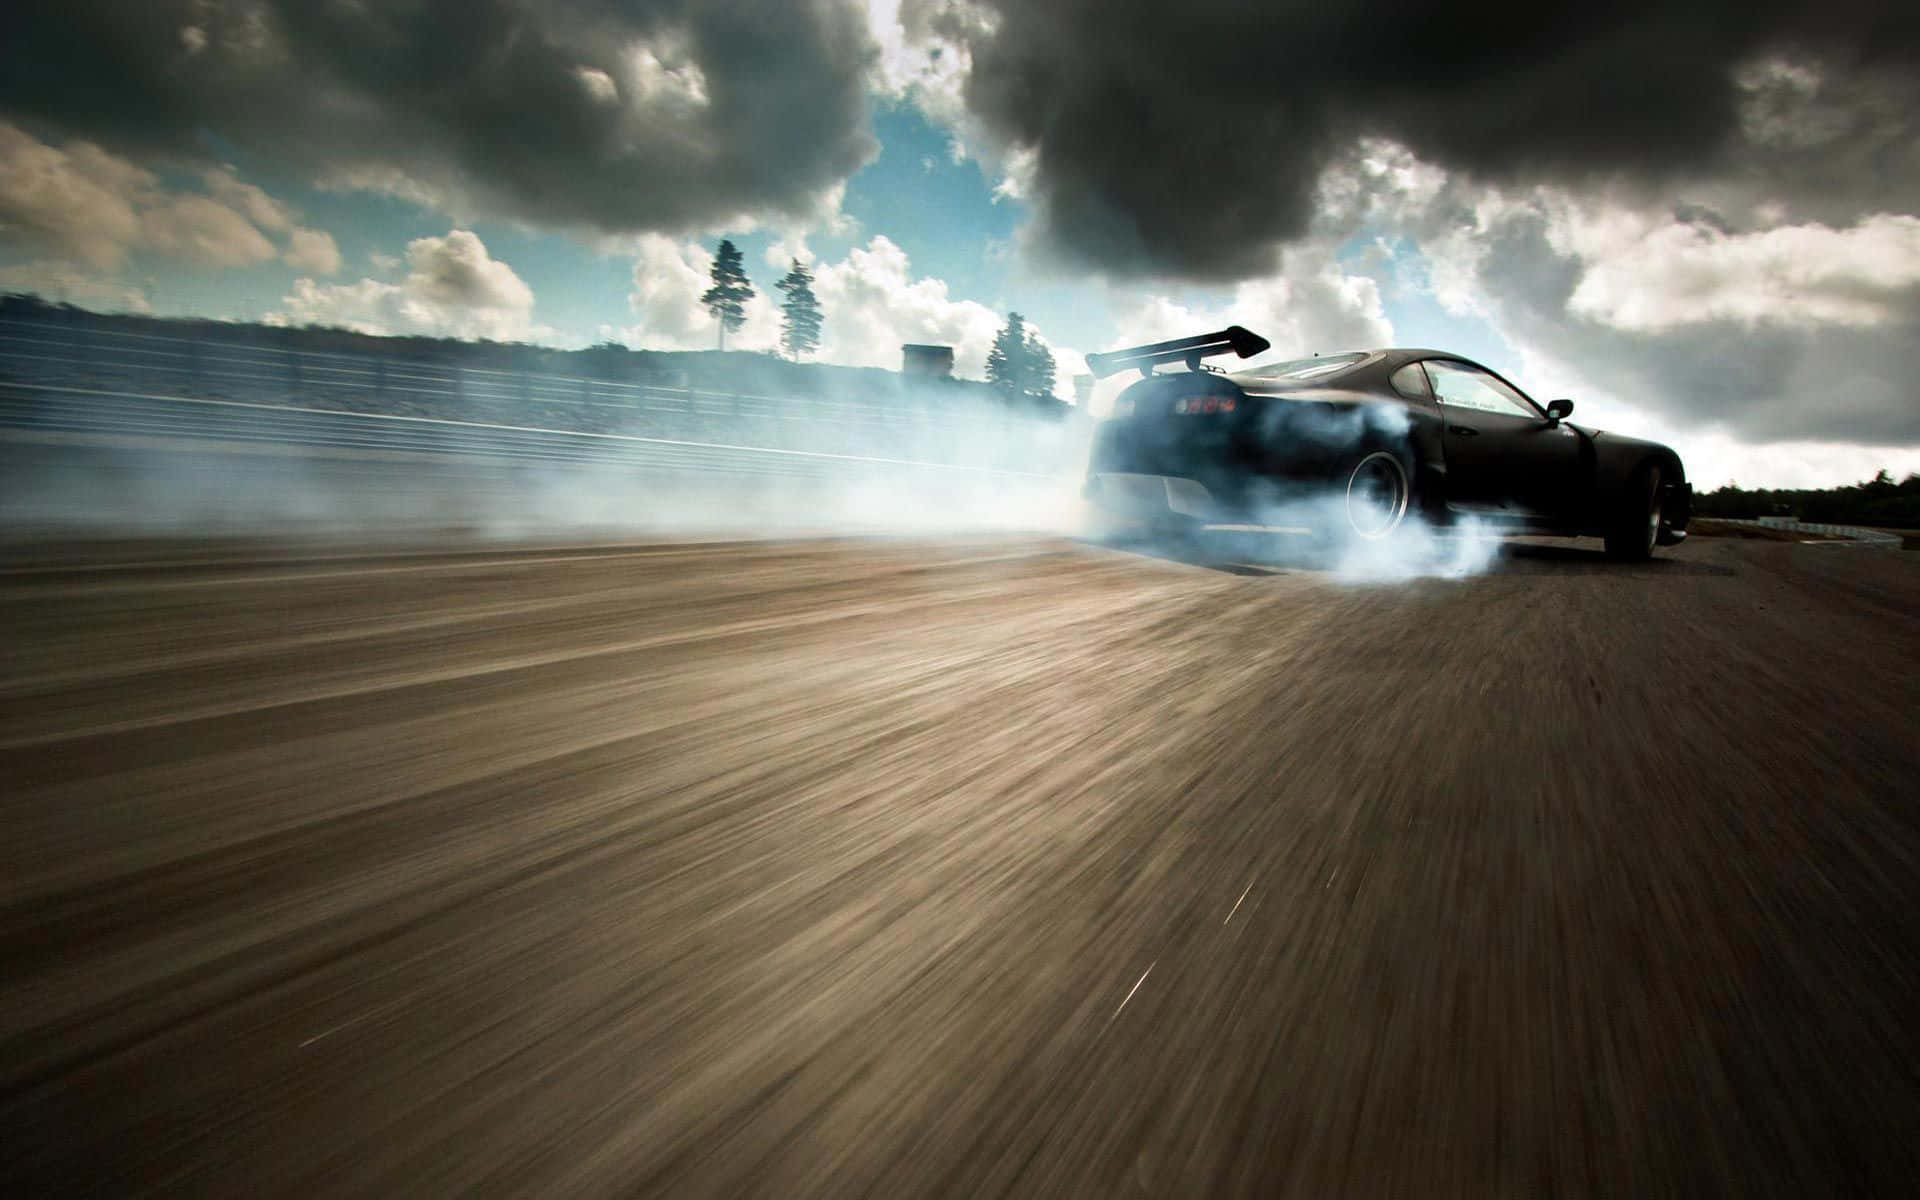 "Take A Spin - Conquer The Sounds Of The Road" Wallpaper